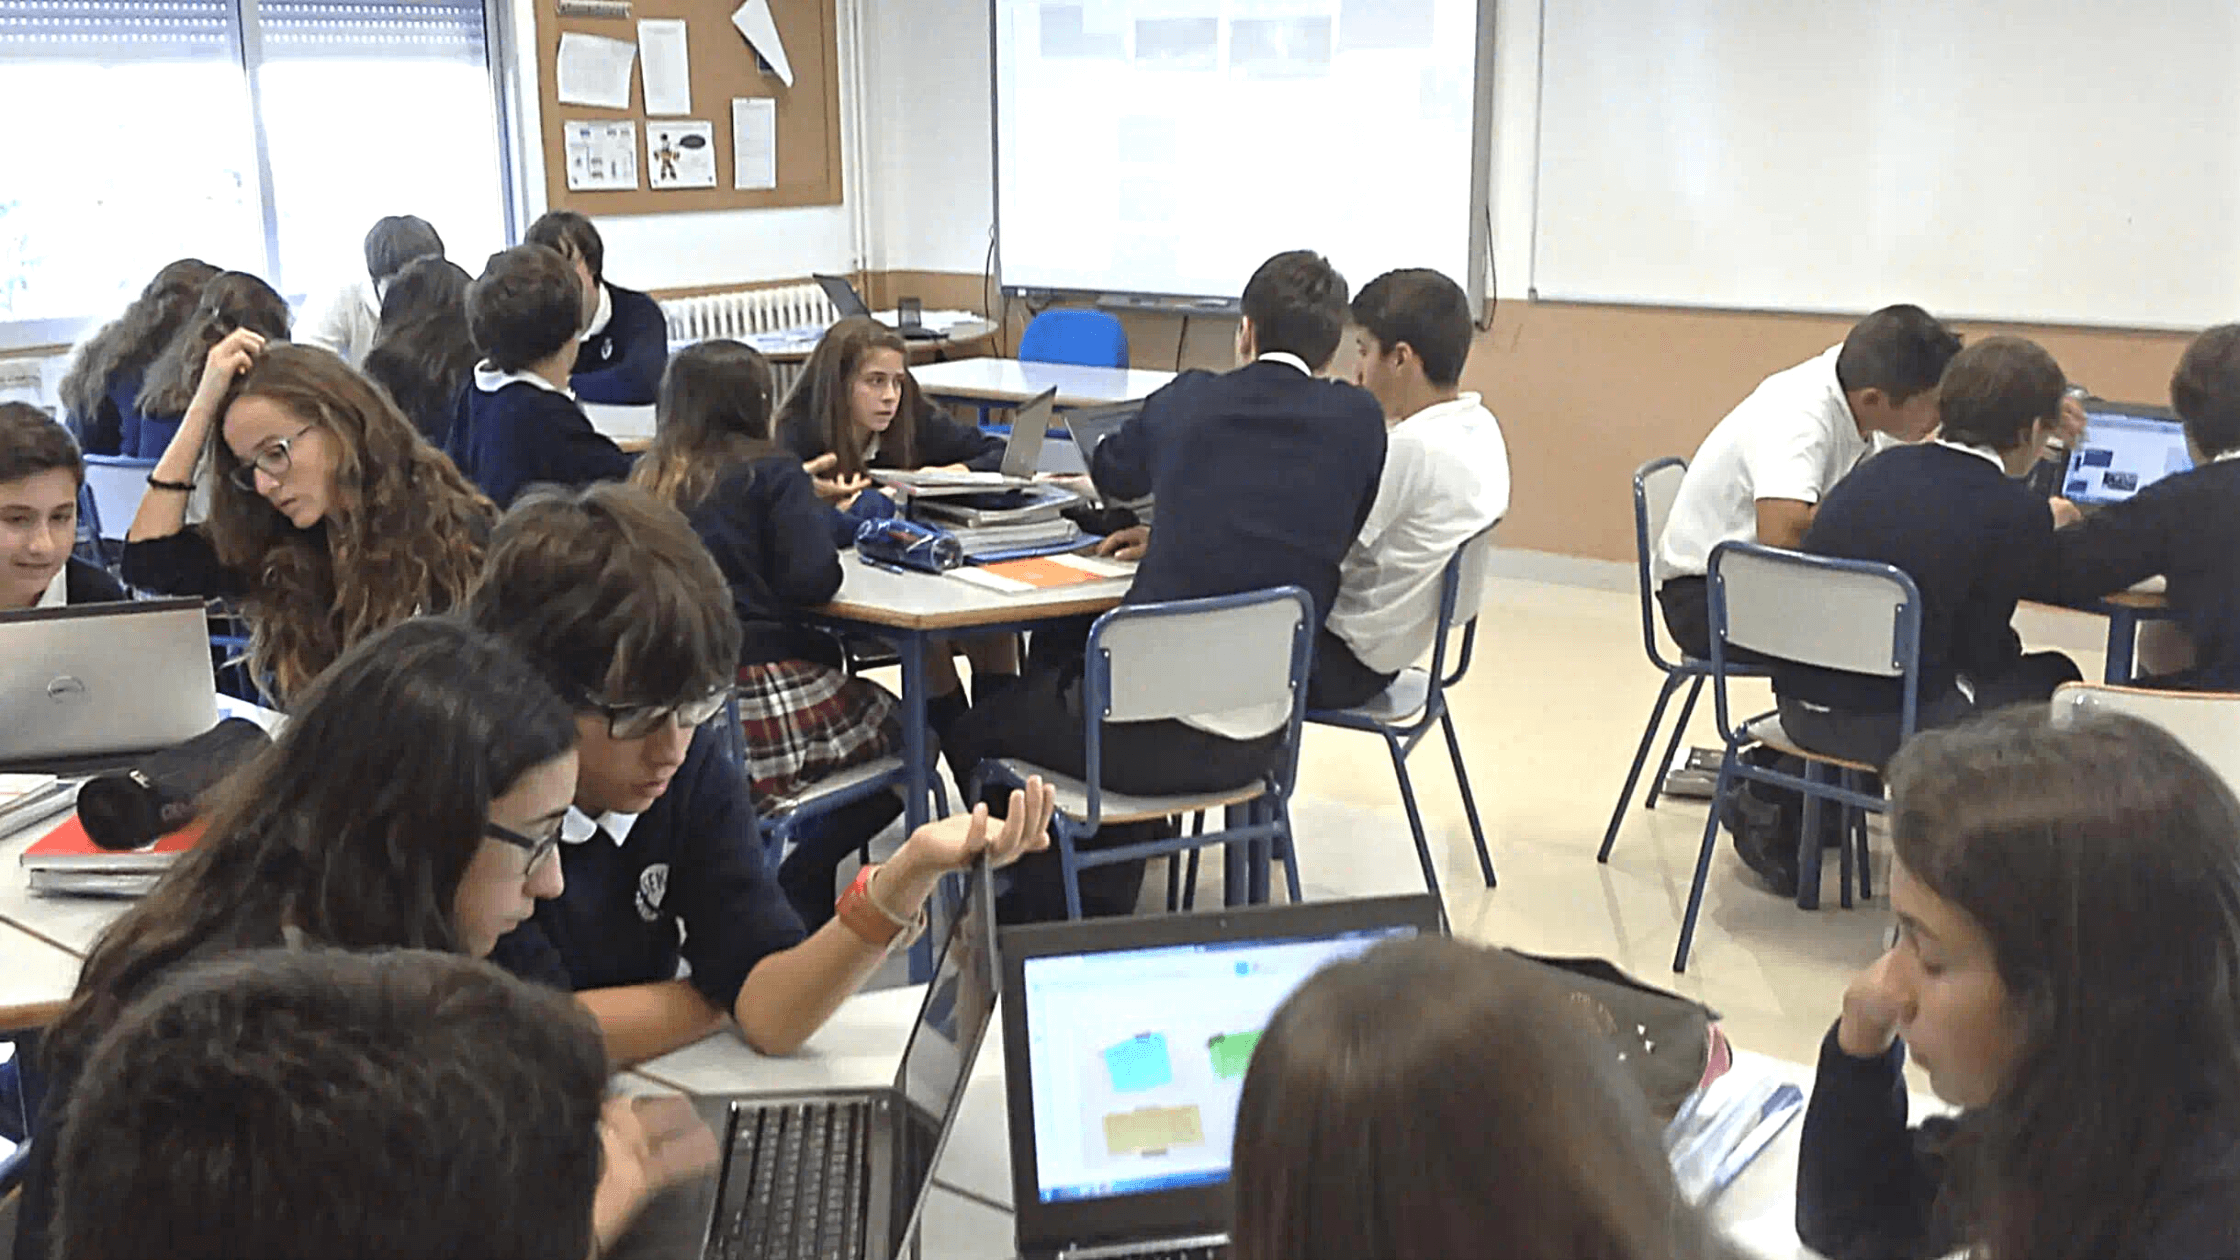 Students at the SEK International School Atlantico working collaboratively in small, breakout groups with student devices.